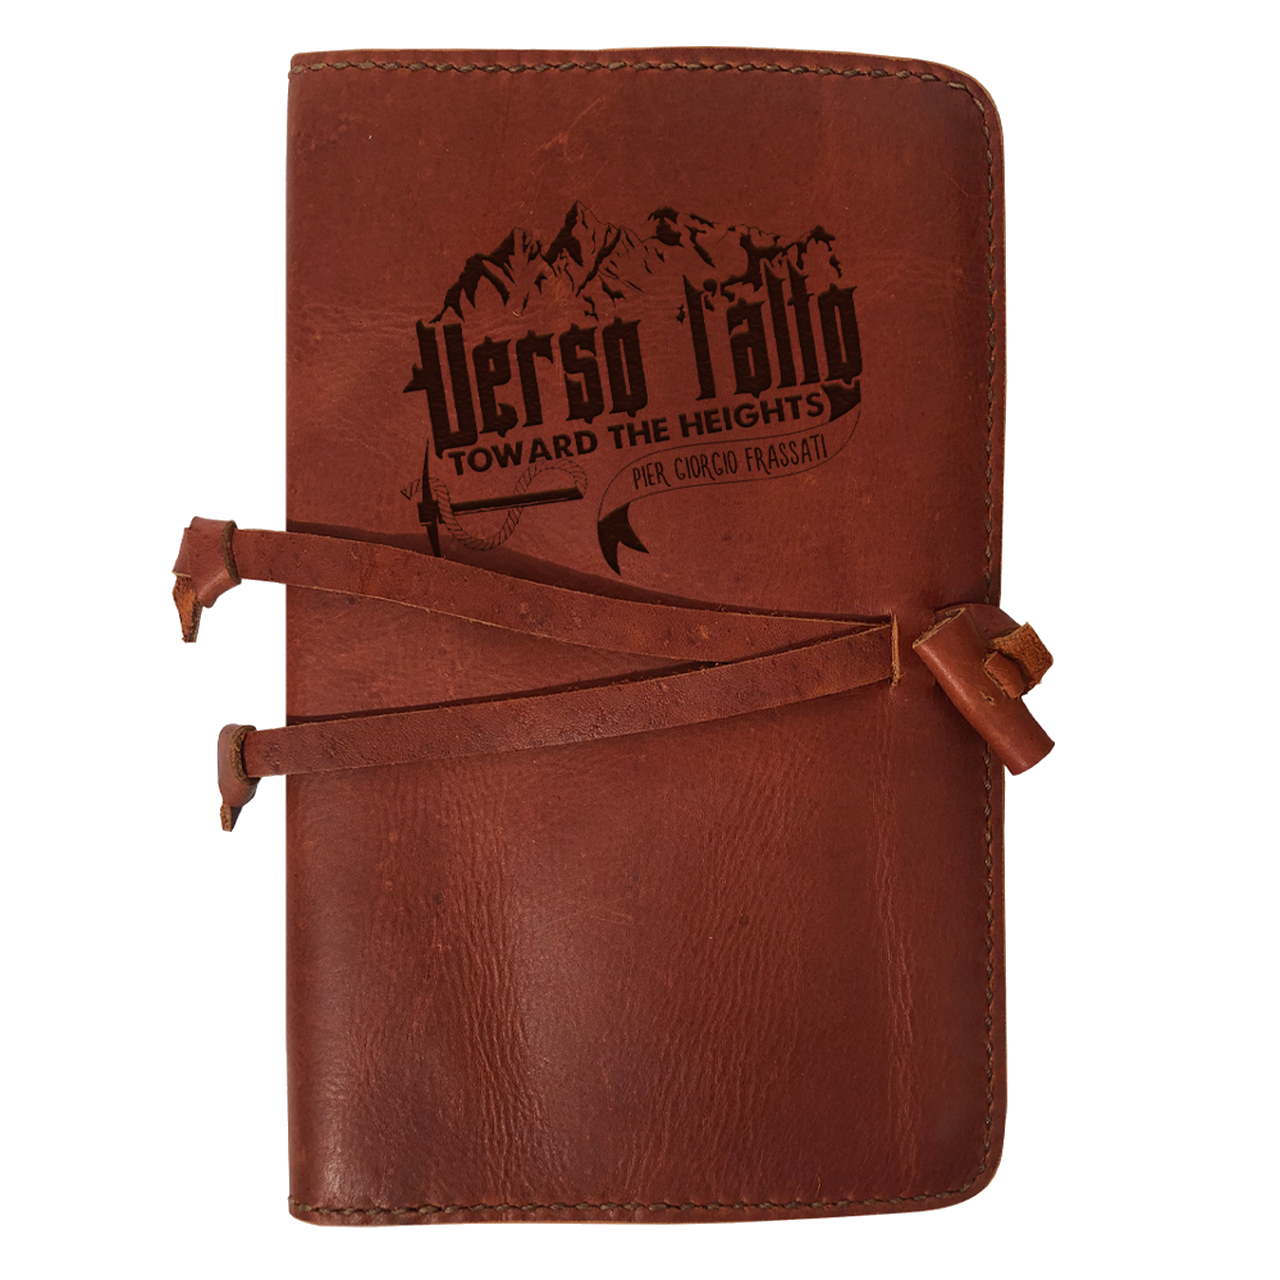 Leather journal cover